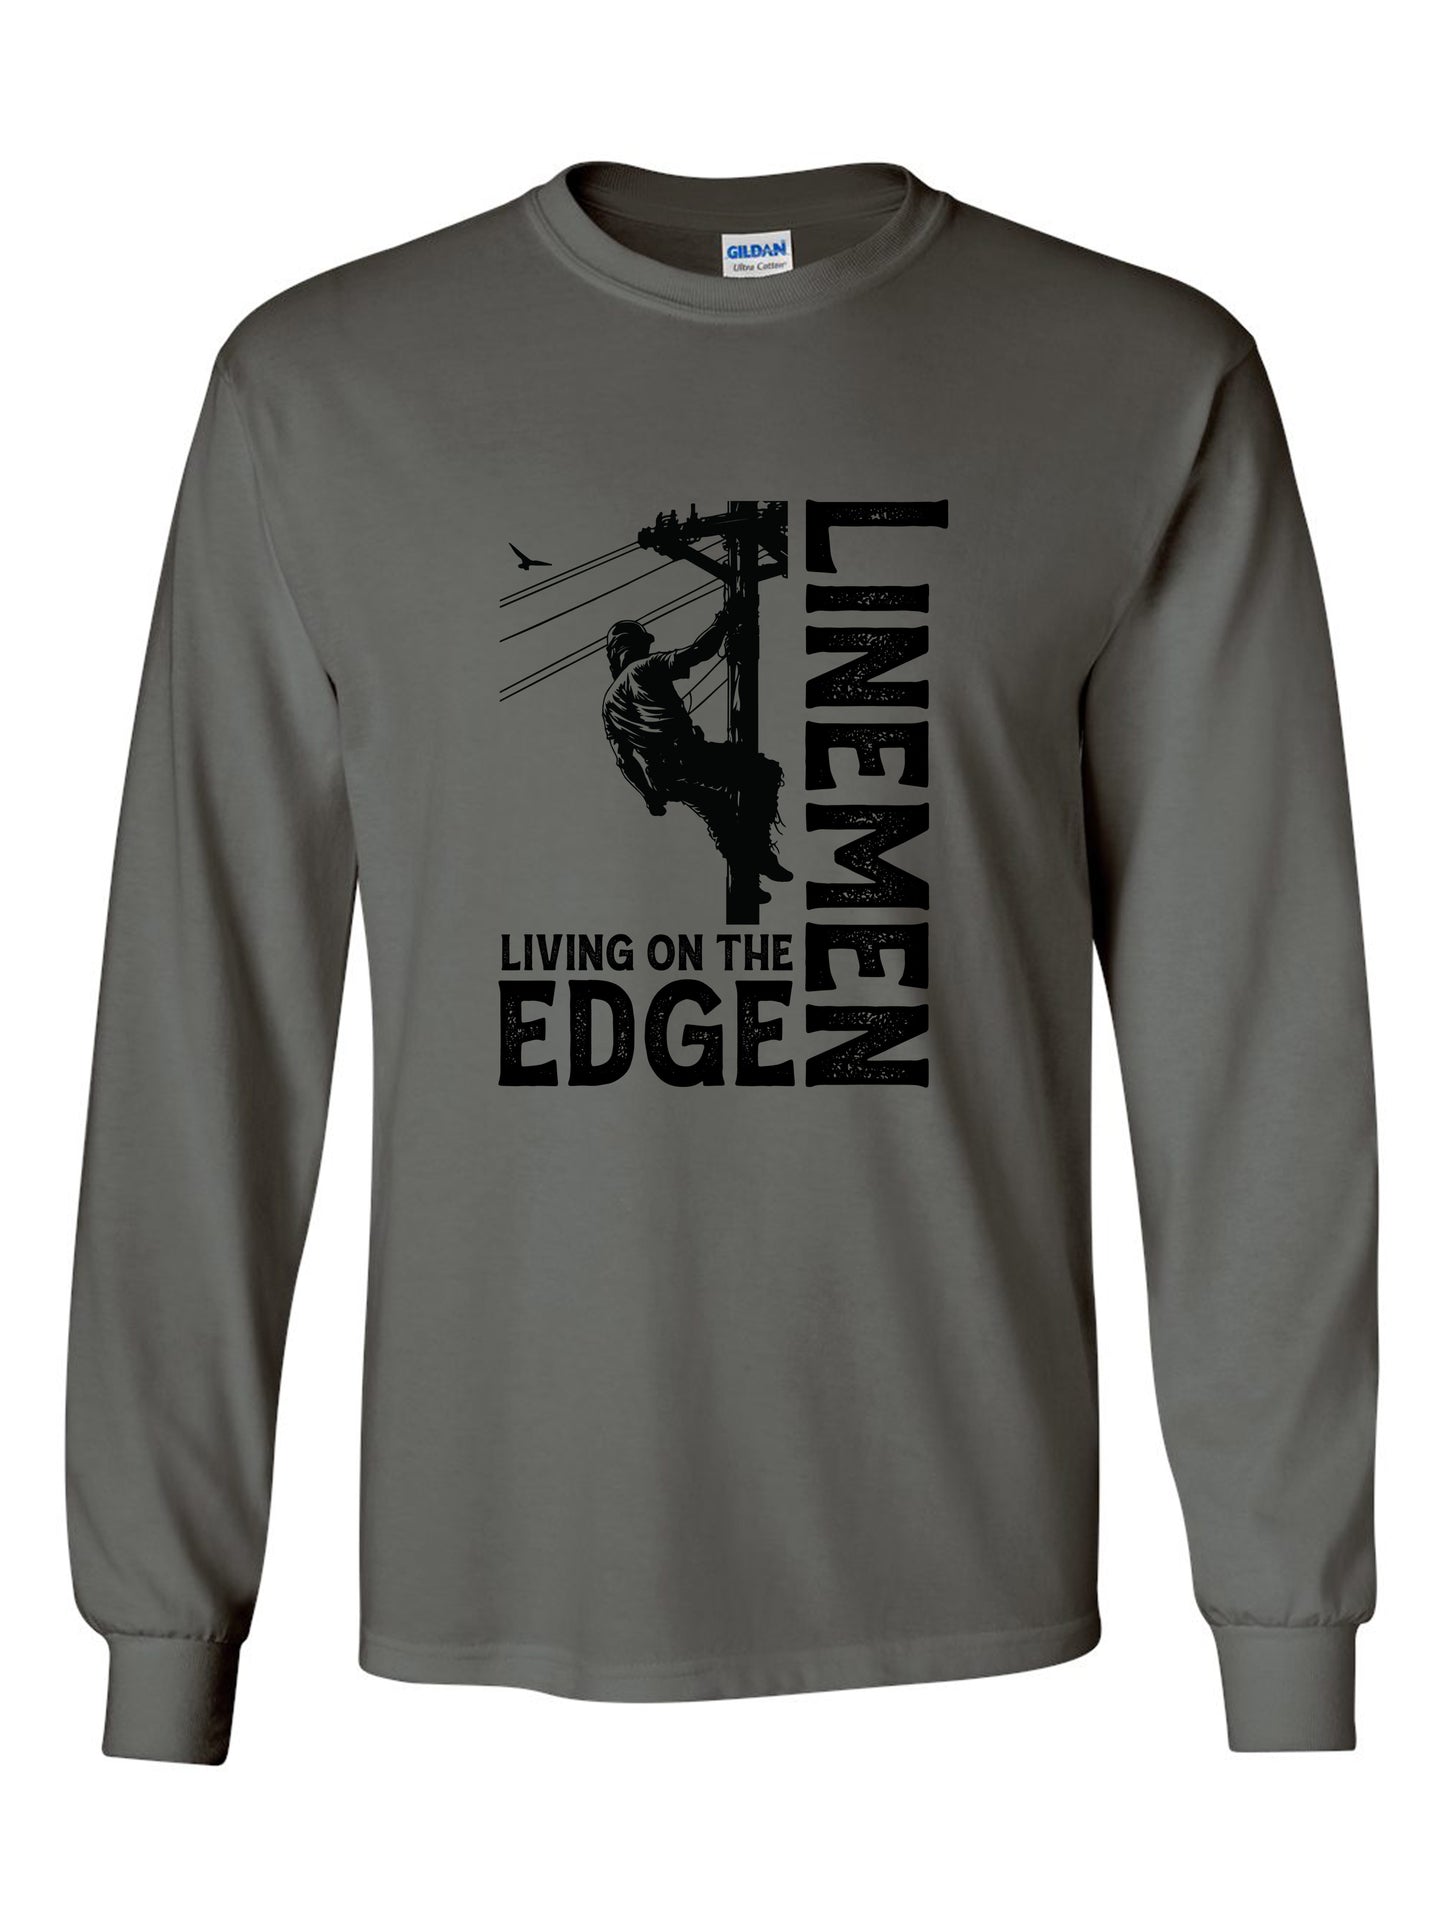 Lineman Living on the Edge - Ultra Cotton Relaxed Fit Long Sleeve Tee - Charcoal